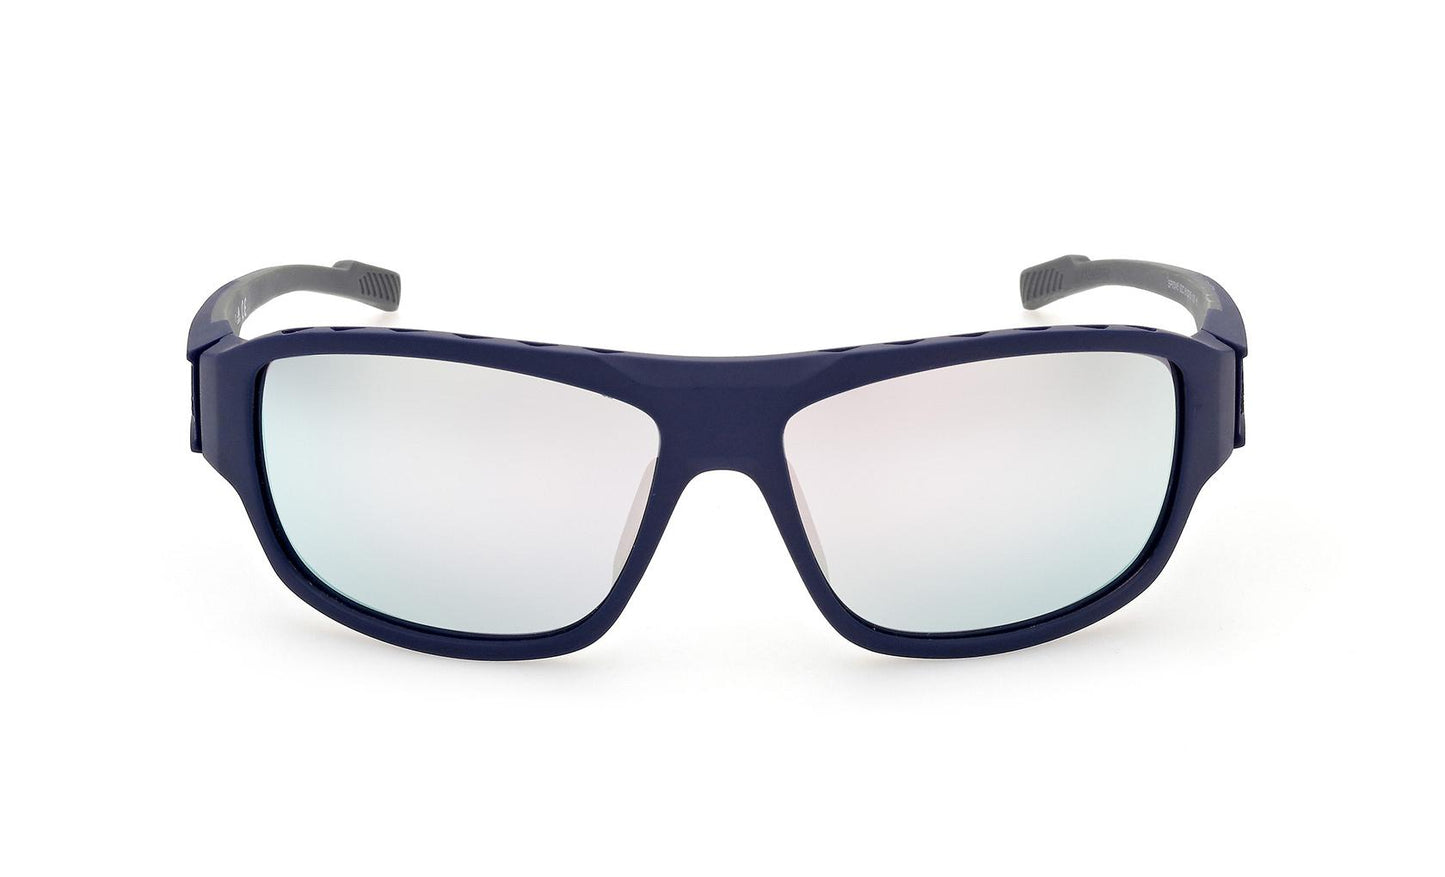 Load image into Gallery viewer, Adidas Sport Sunglasses 92C BLUE/OTHER
